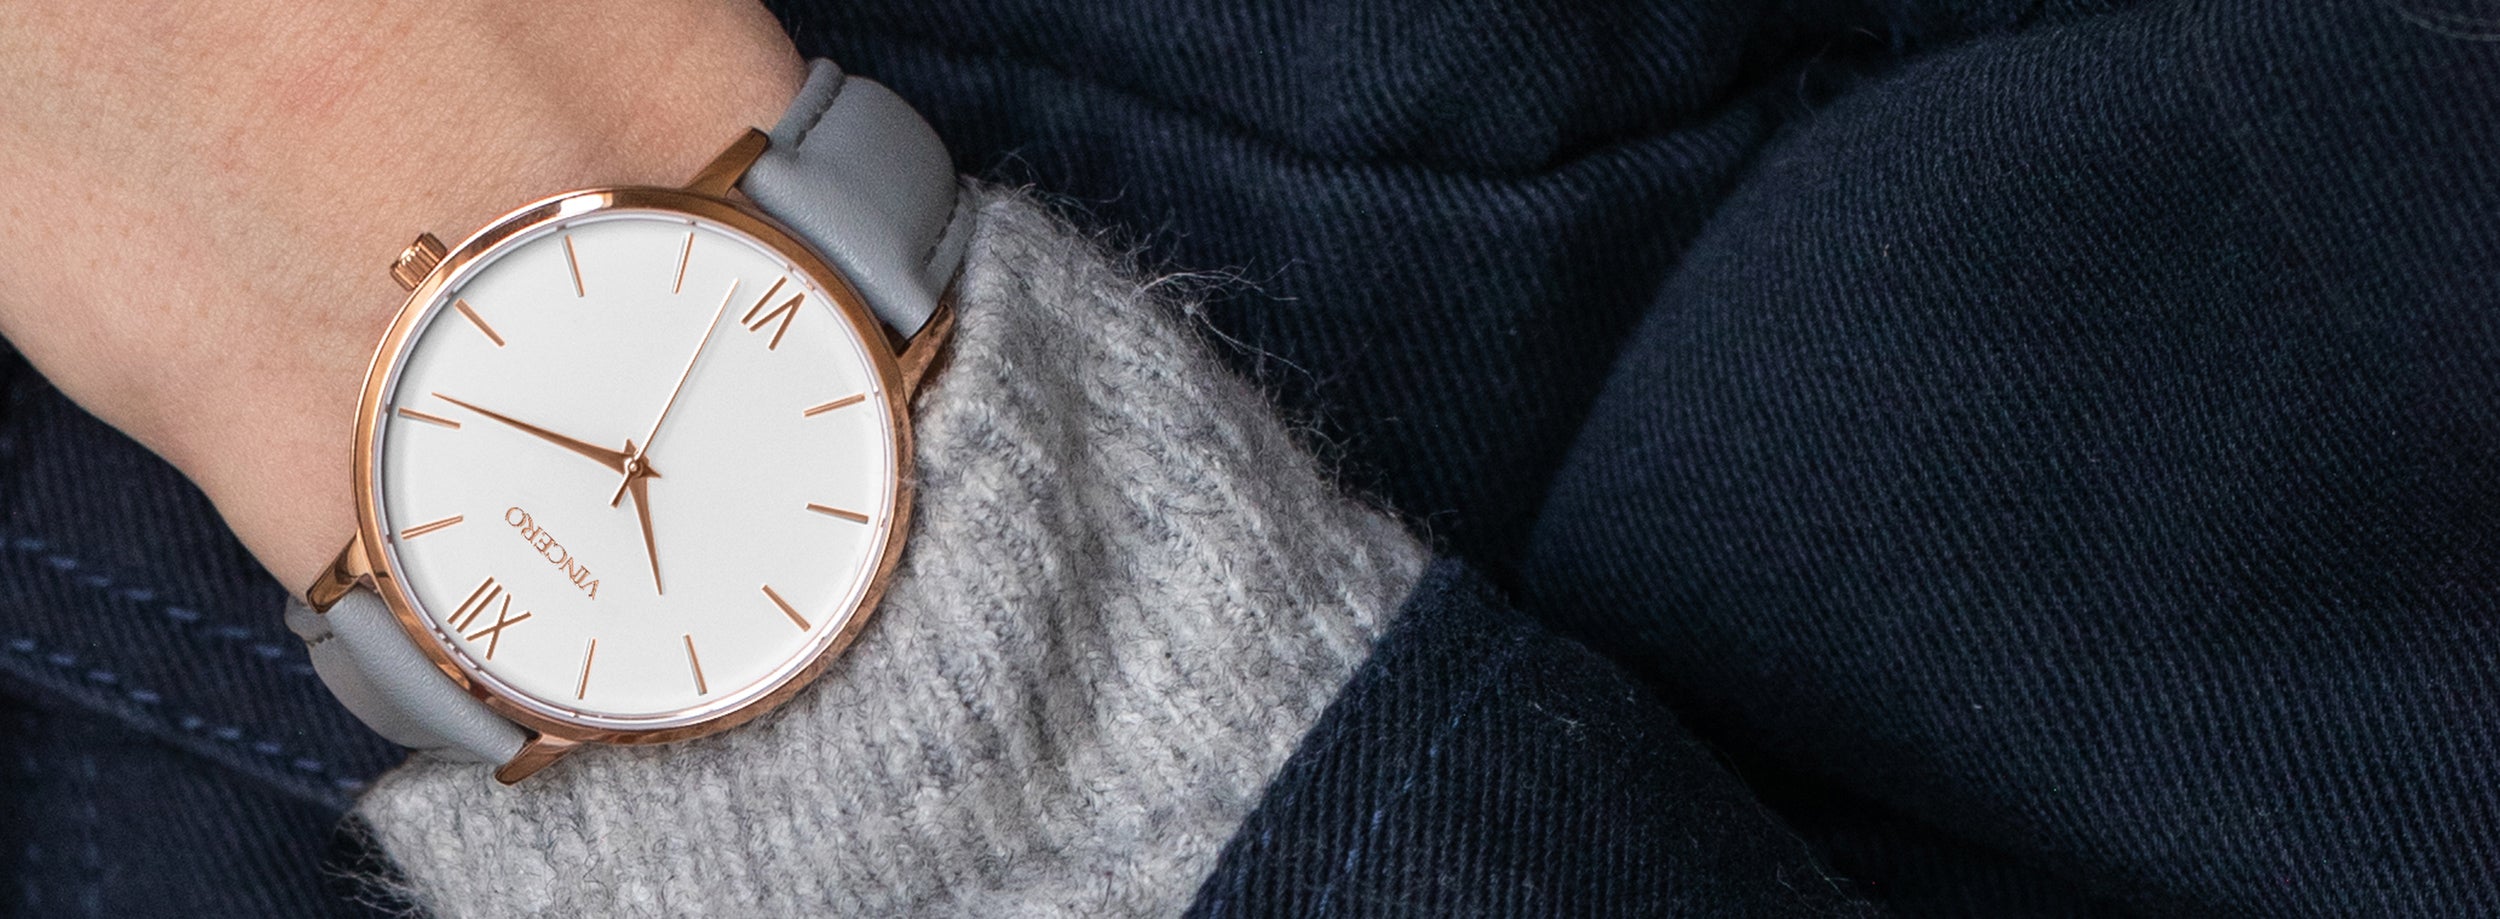 Close up of white and rose gold watch with grey leather strap